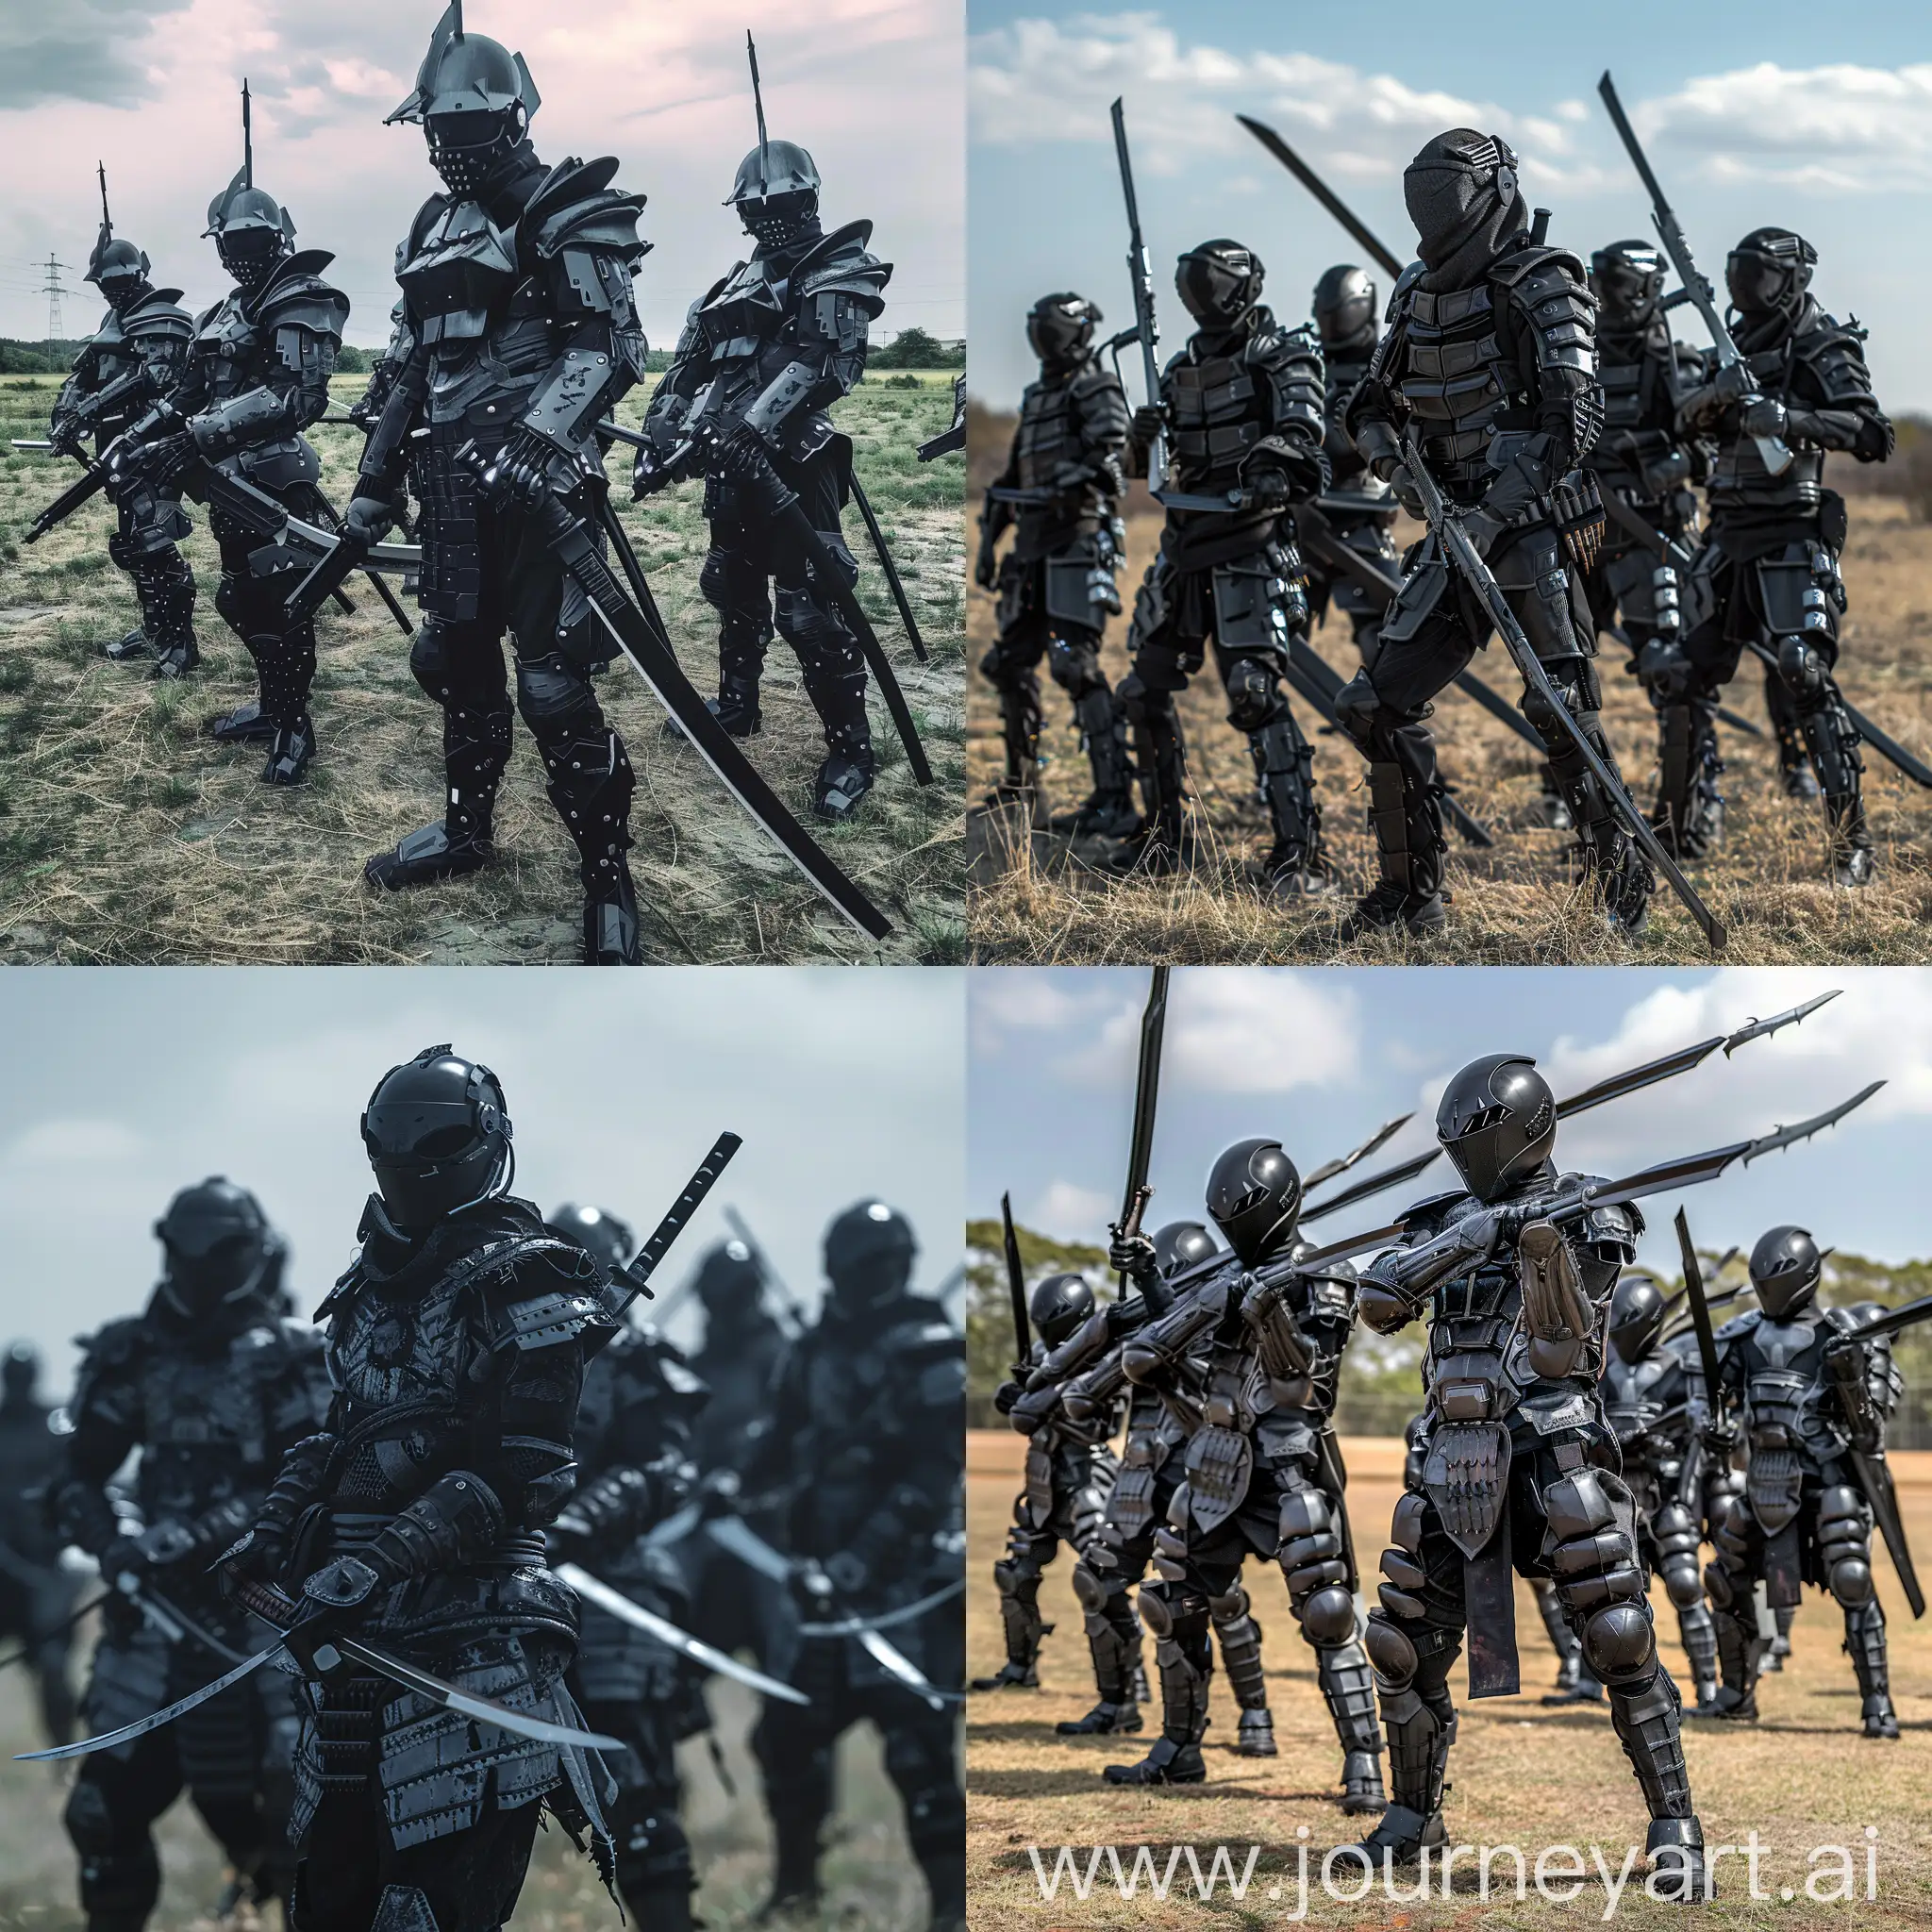 Group of slightly futuristic soldiers but instead of rifles they armed only with futuristic swords and katanas. They stand in a specific stance. Soldiers are eager to fight. They are stationed in an open field. They wear black armor equipped with metal plates